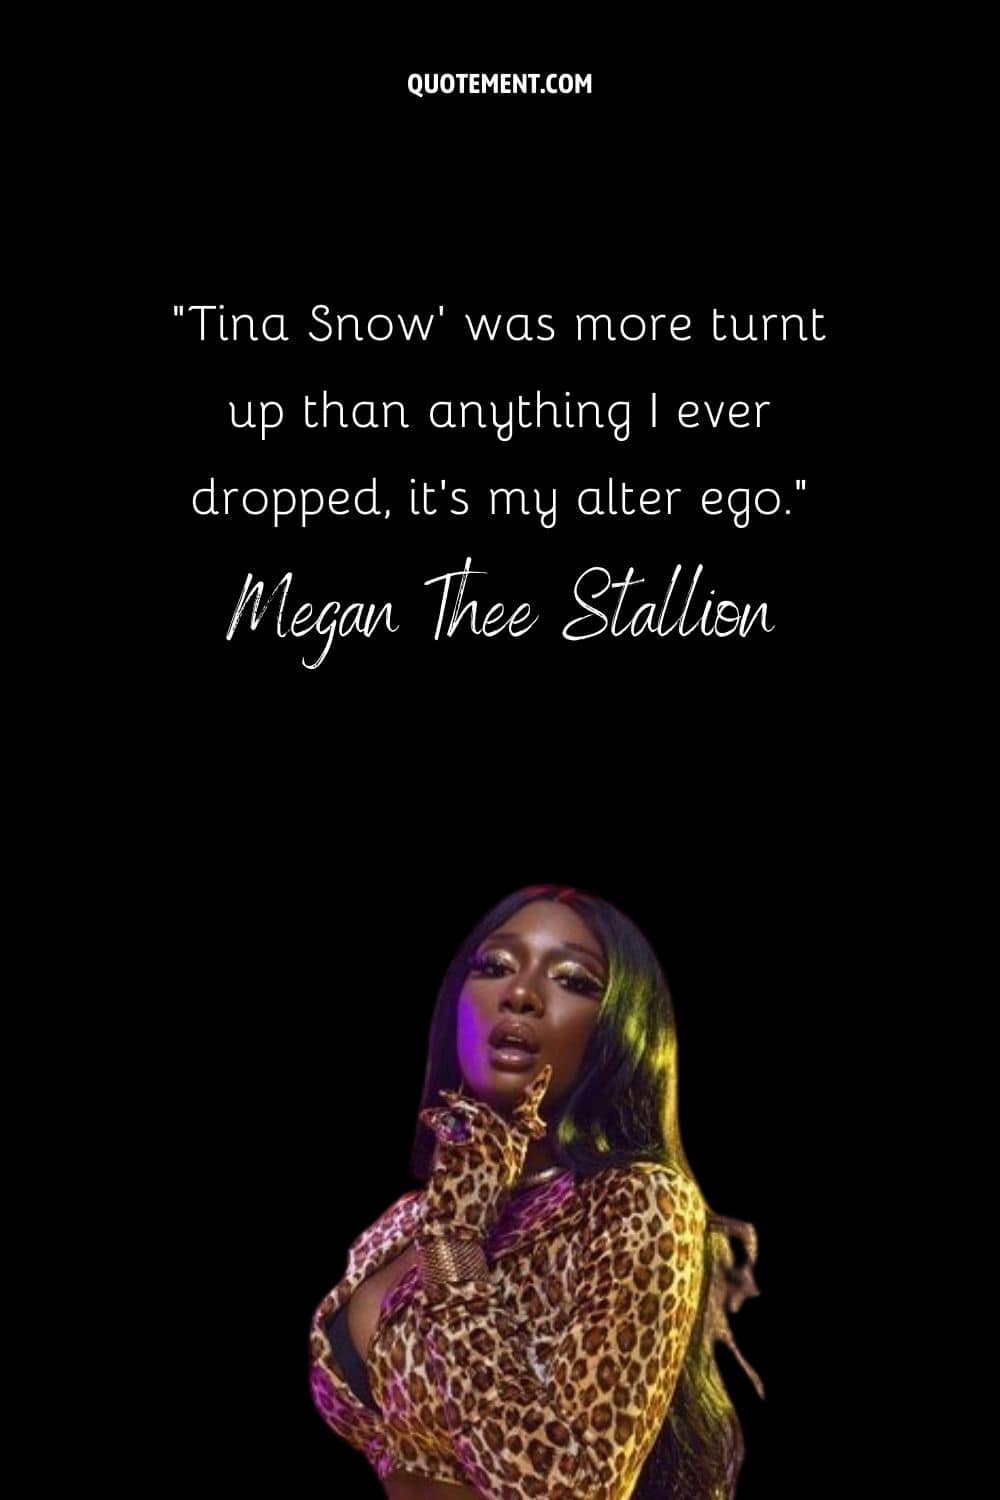 “Tina Snow' was more turnt up than anything I ever dropped, it's my alter ego.” — Megan Thee Stallion